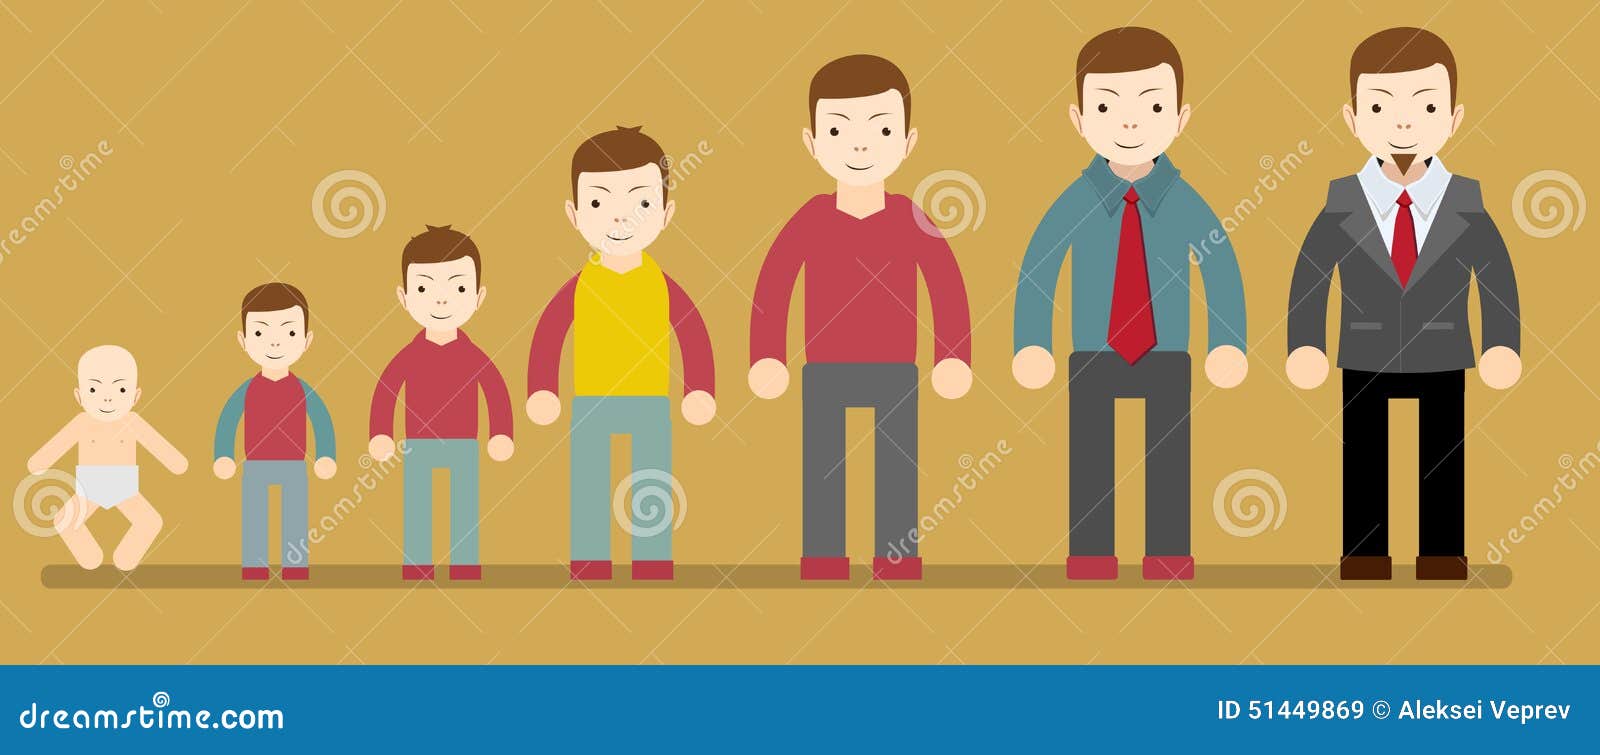 Set Of Growing Up Evolution On White Background. All The Stages Of Growing  Up From Baby To Old Men. Age Stages. Royalty Free SVG, Cliparts, Vetores, e  Ilustrações Stock. Image 60196843.